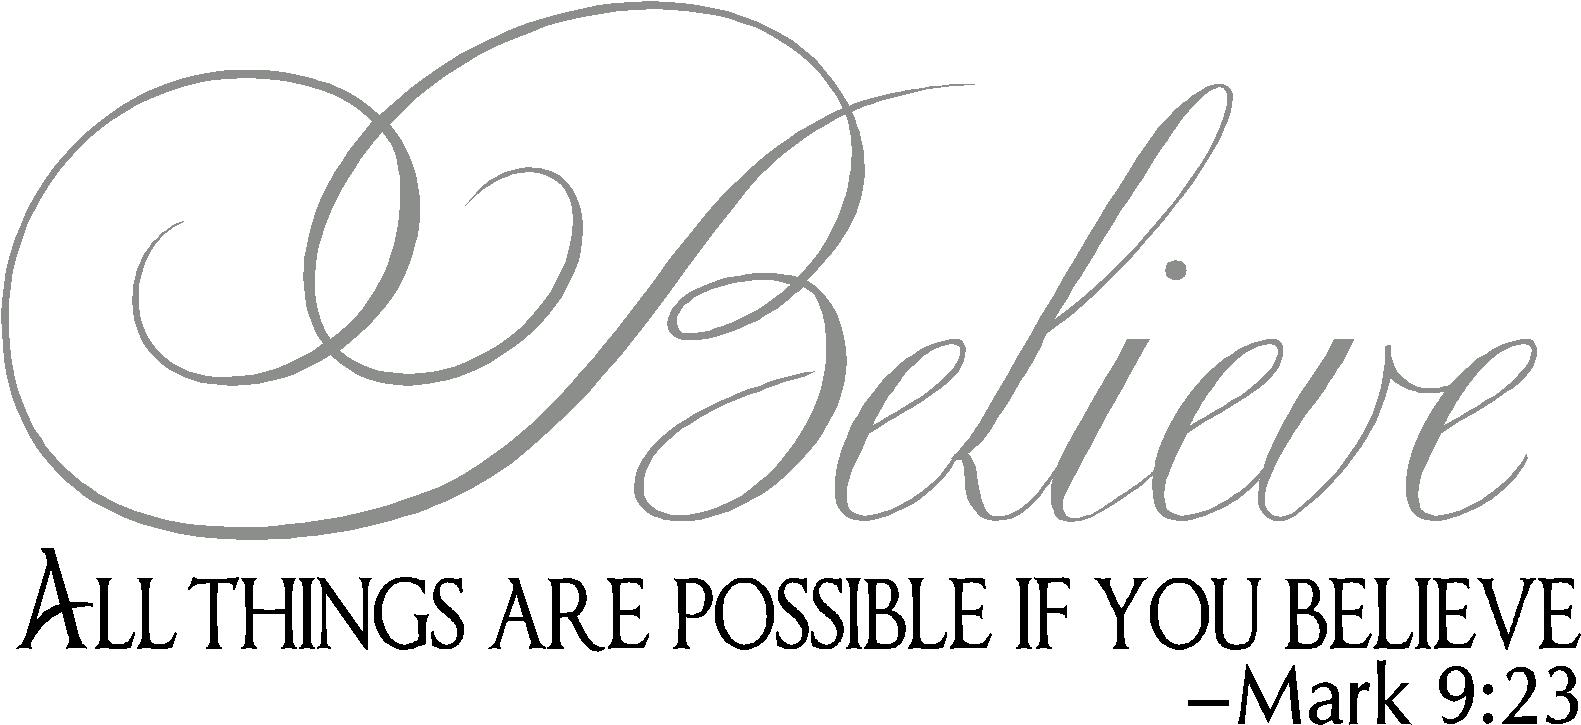 Possible com. All things are possible if you believe. Believe all. Текст для открытки бренда. Anything is possible, if you believe..